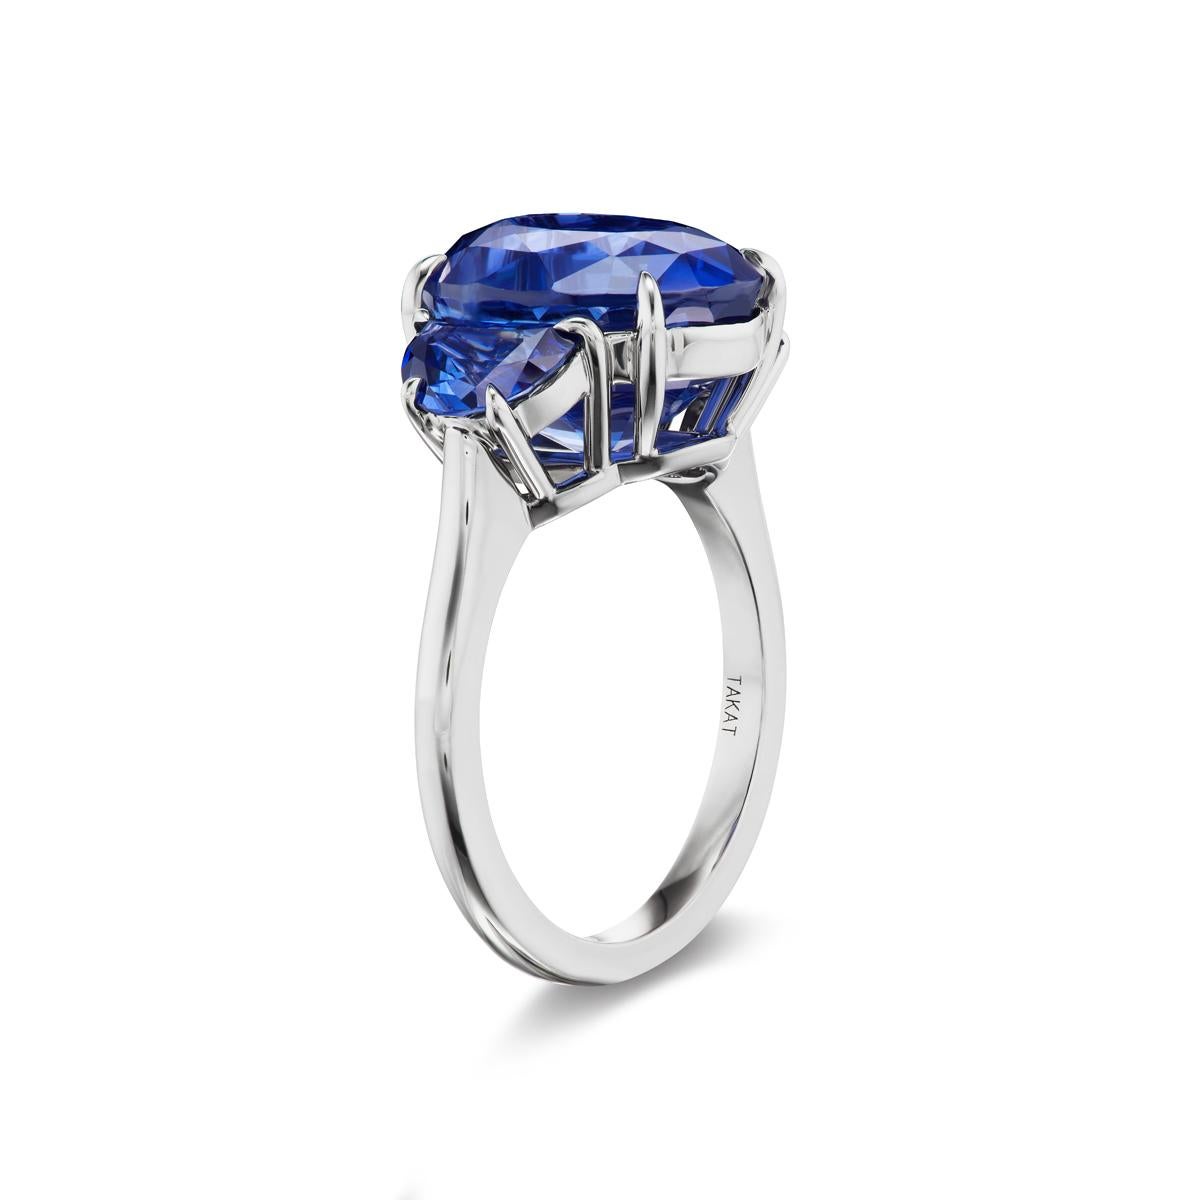 Set in a beautiful 4 claw prong setting submerged in only the finest 18K White Gold sits a vibrant deep blue 9 ct Oval shaped Sapphire. Surrounding the beauty of this blue dazzle are 2 glimmering half moon shaped Sapphires that are 1.45 ct